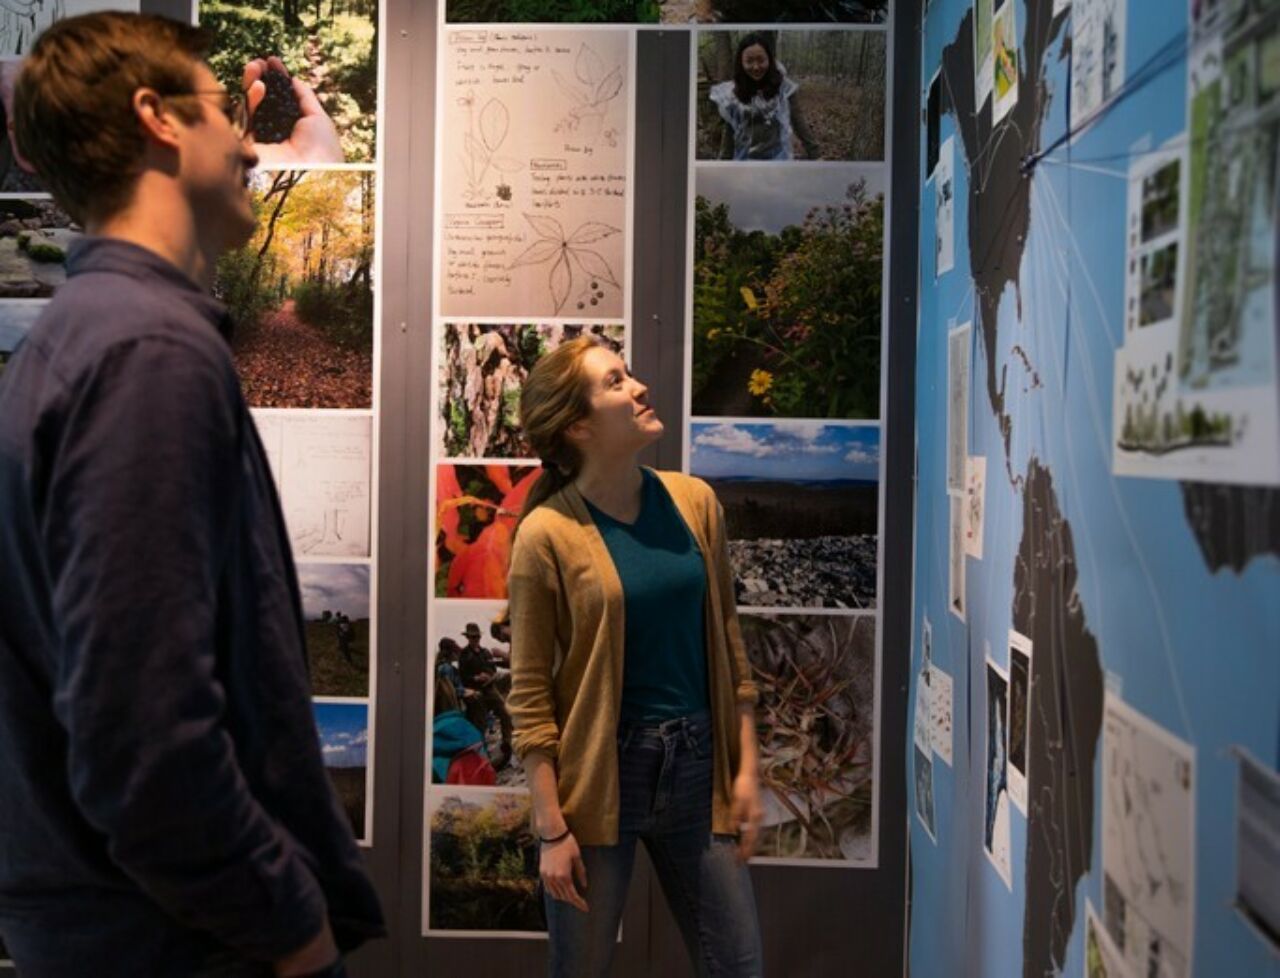 Two students discussing a landscape architecture design project pinned up on wall for review.